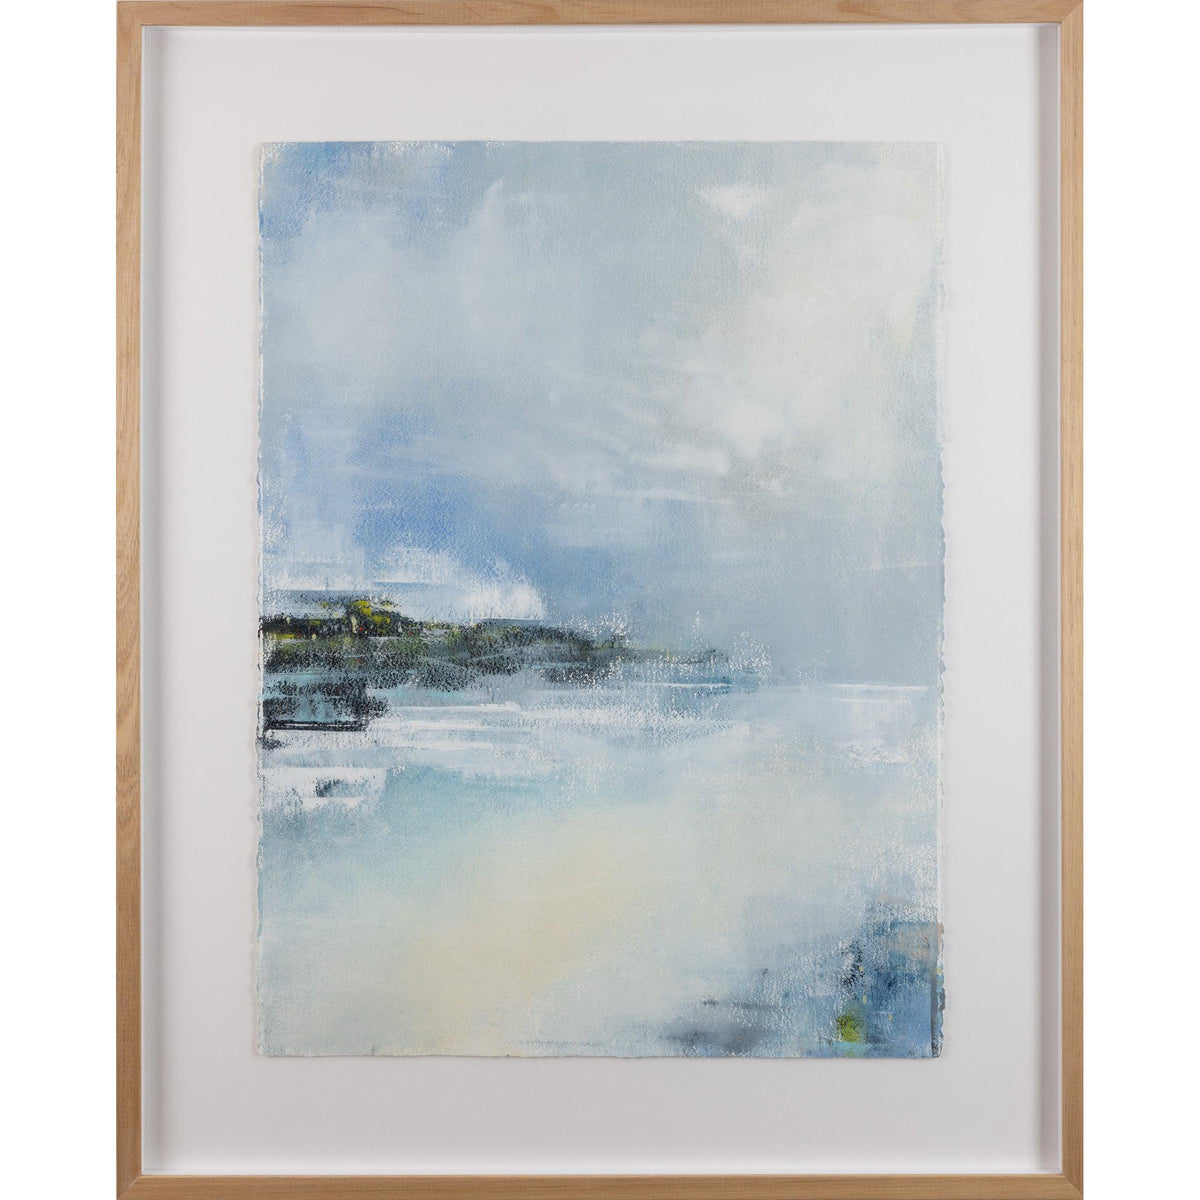 &#39;The Other Side&#39; oil on paper by Ben Lucas, available at Padstow Gallery, Cornwall